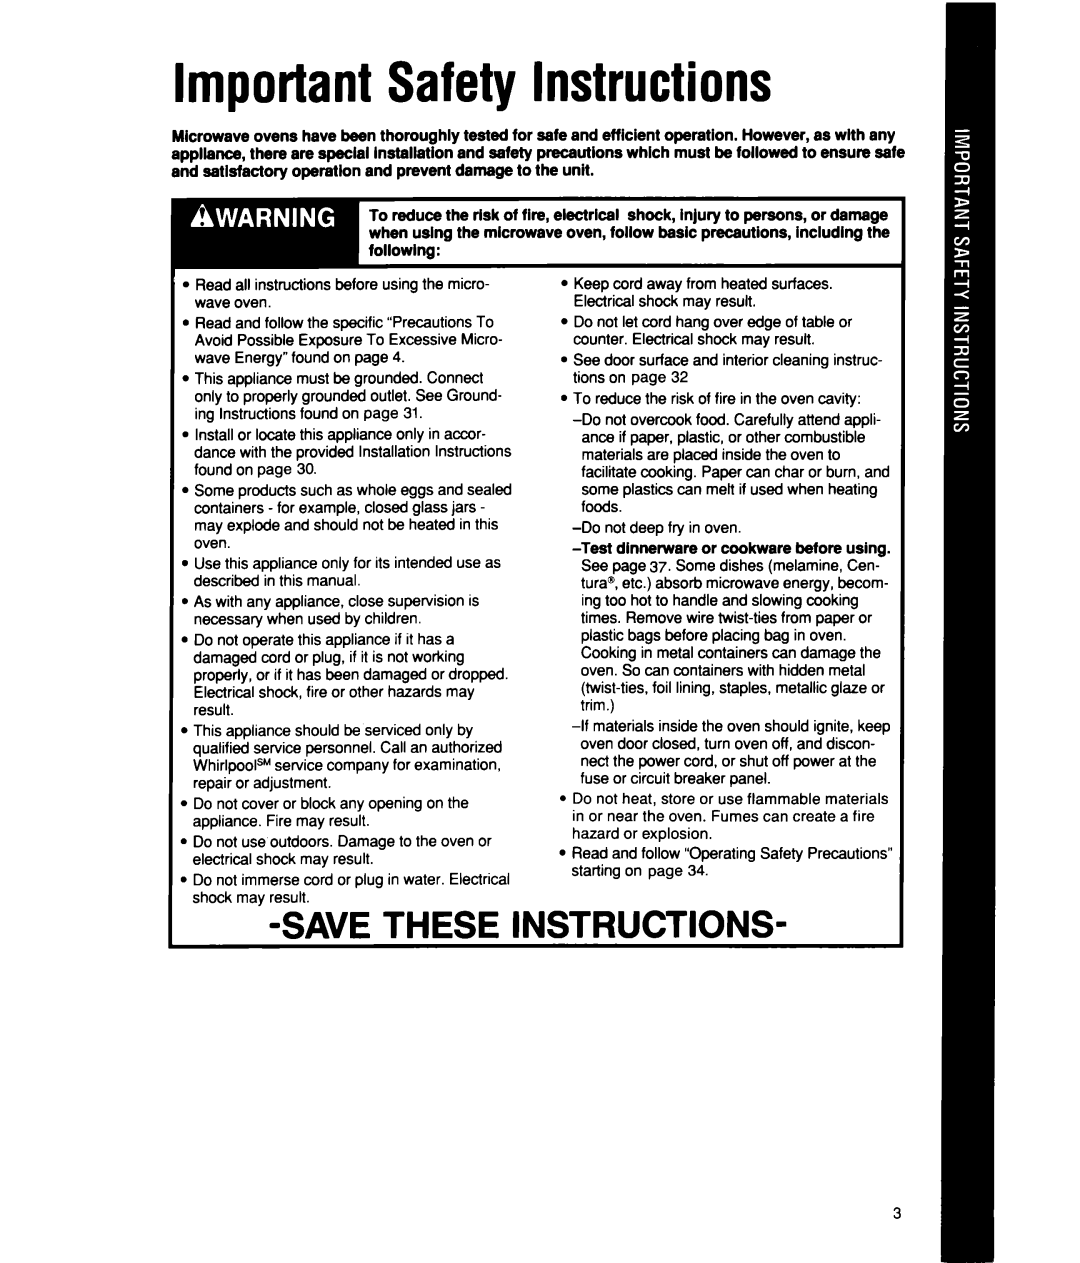 Whirlpool MS2101XW manual Important Safety Instructions, Testdinnerware or cookware before using, Savethese Instructions 